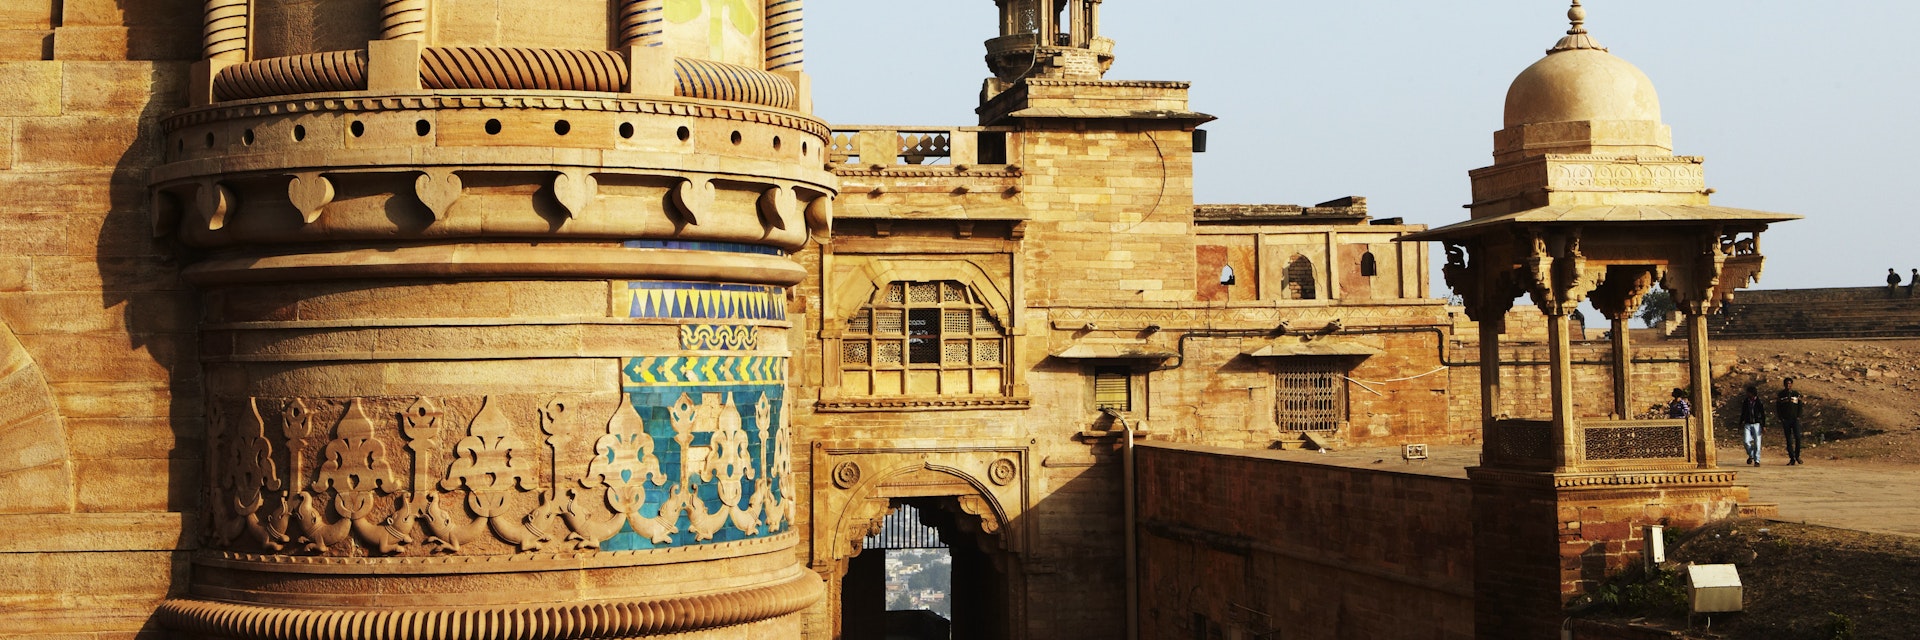 Man Singh Palace in Gwalior Fort, also known as painted palace.